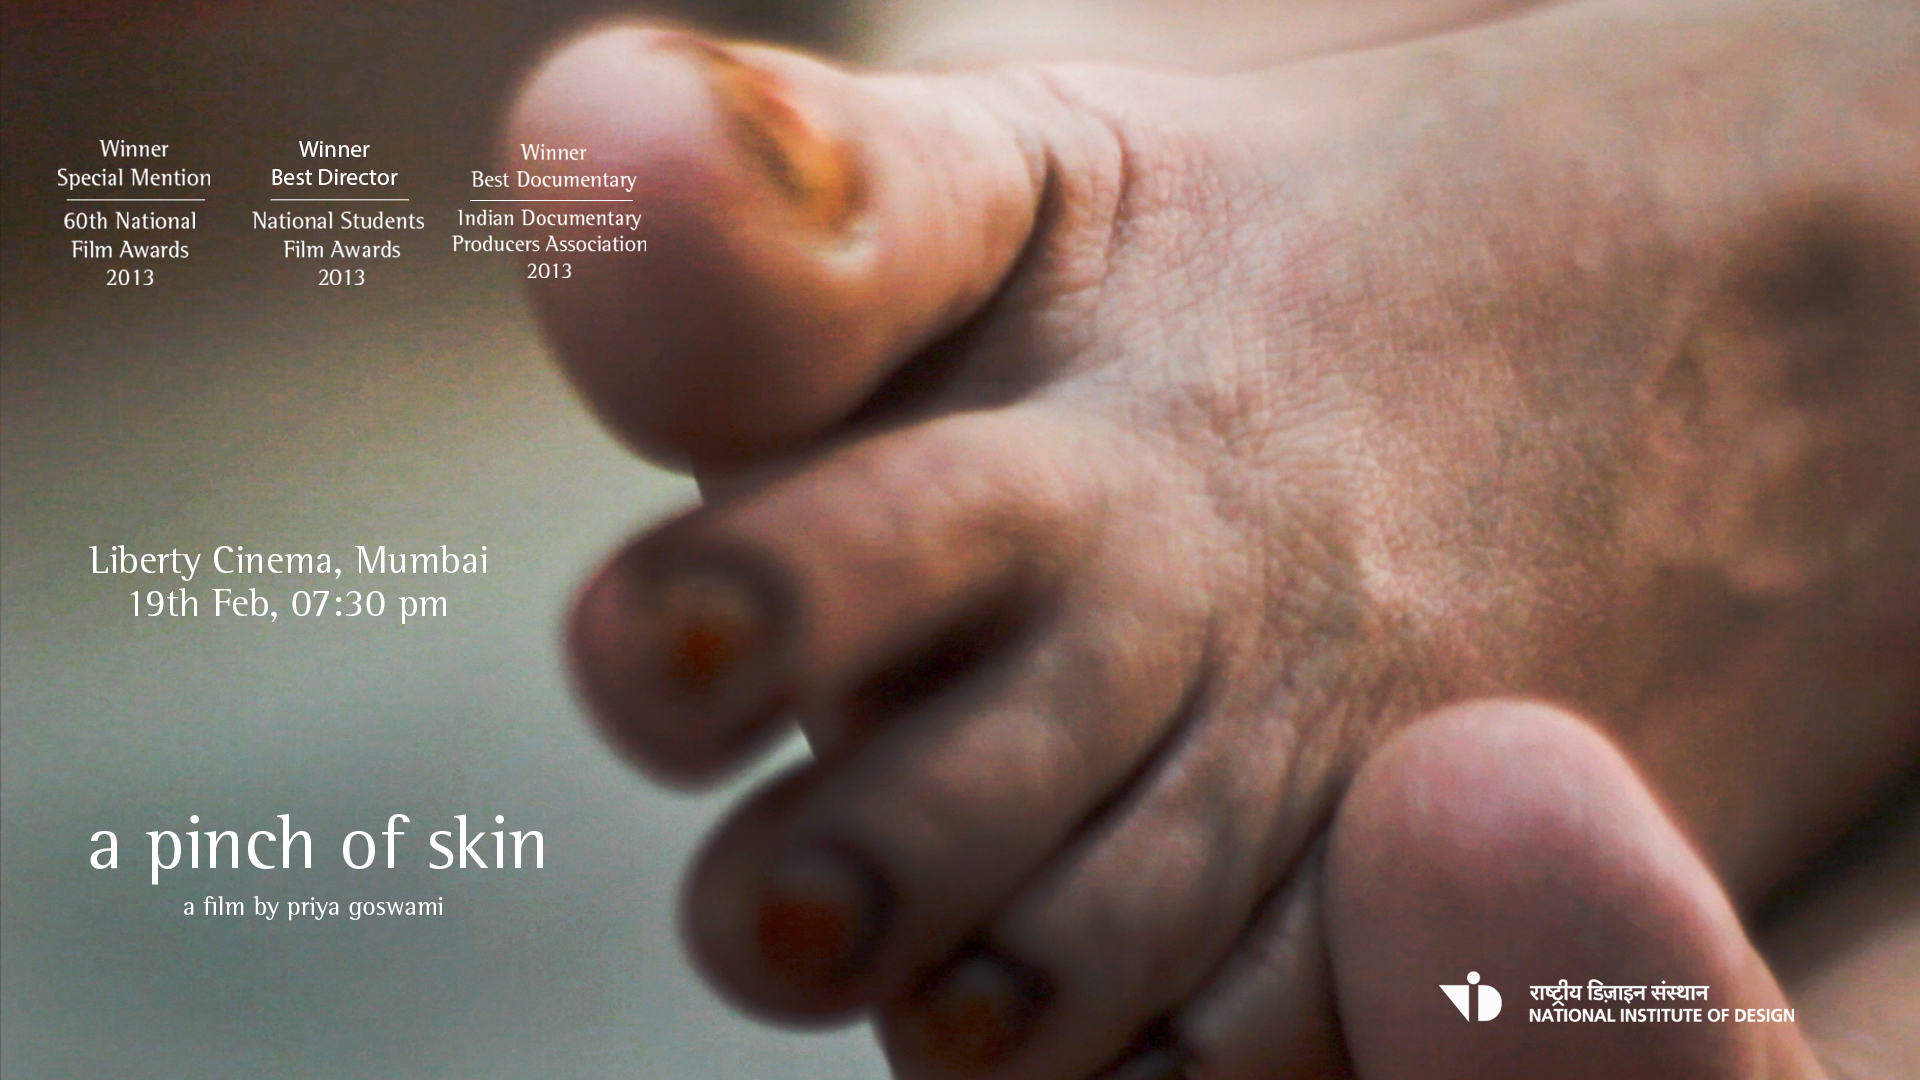 Come See A Pinch of Skin -  A film by Priya Goswami